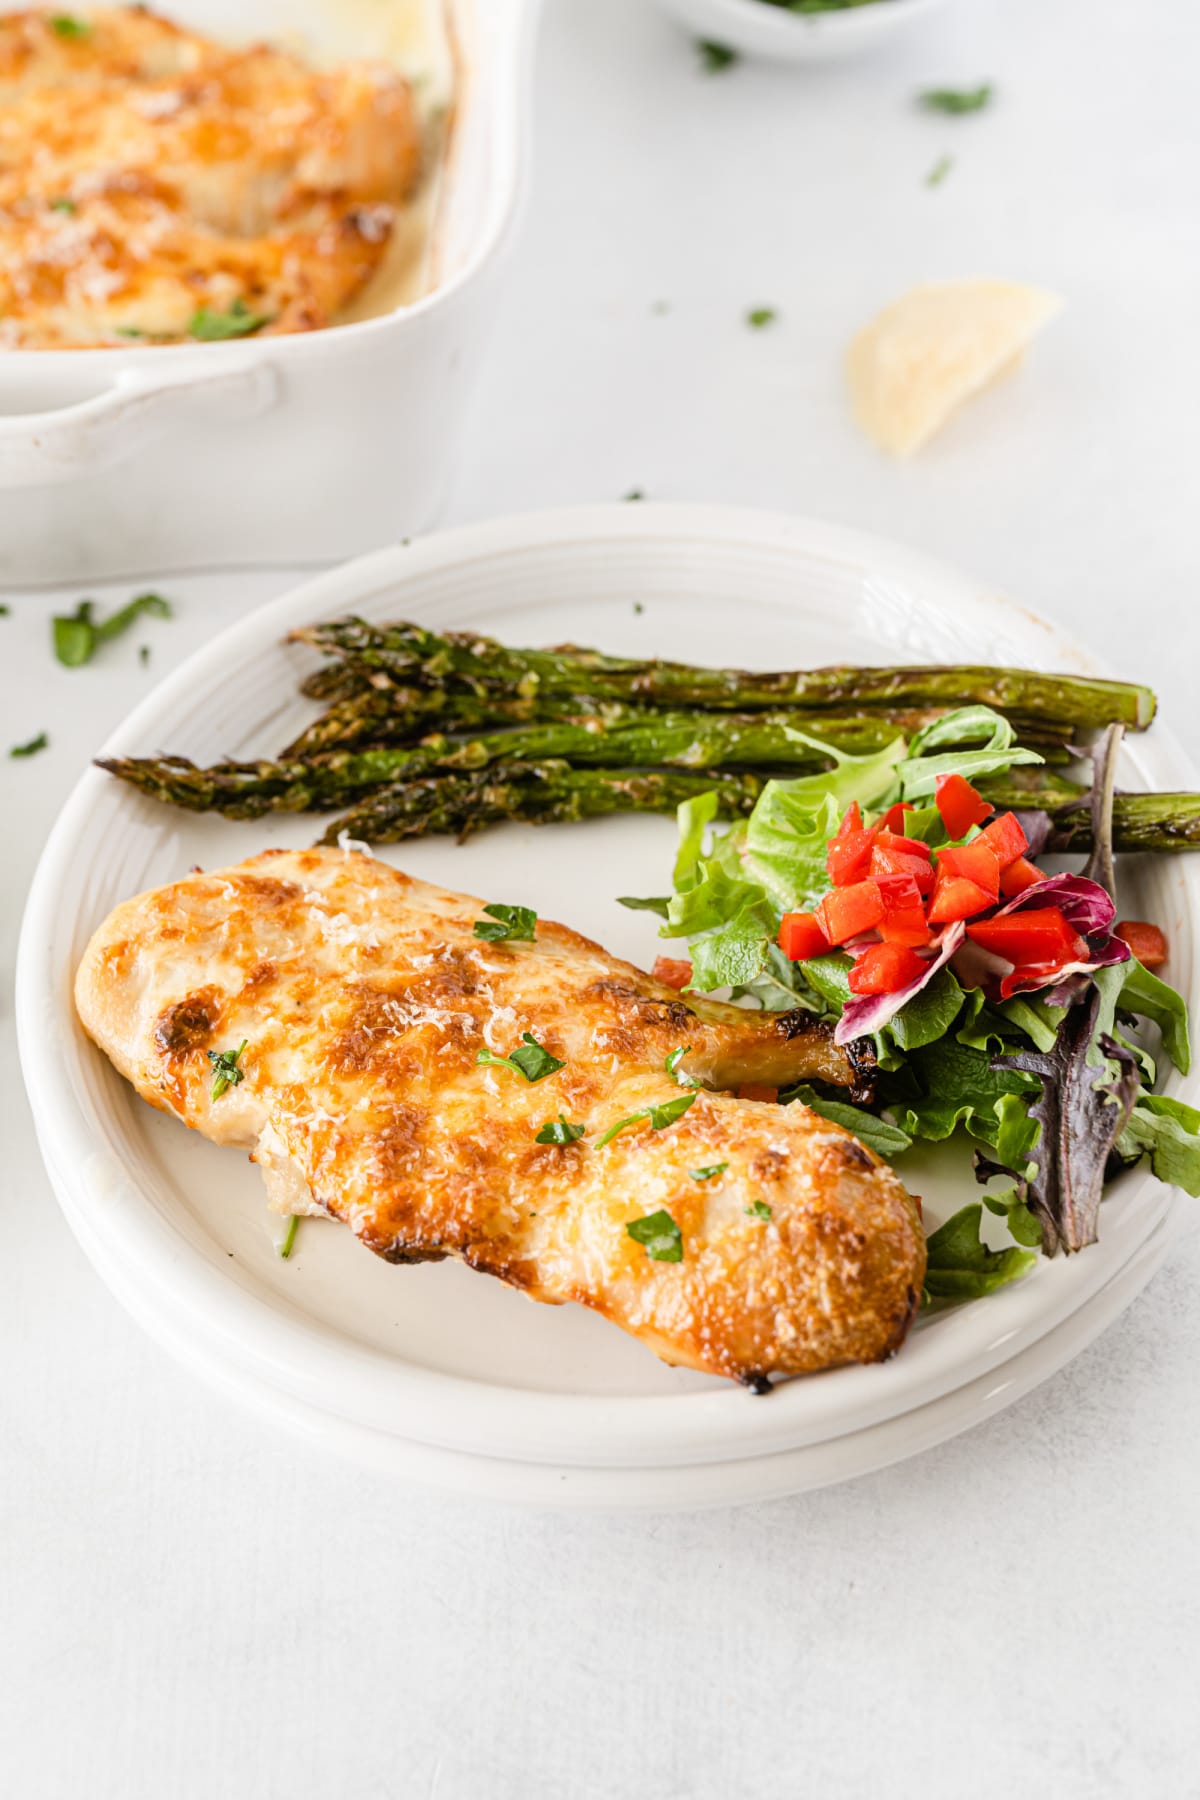 Parmesan Crusted Chicken on plate with veggies